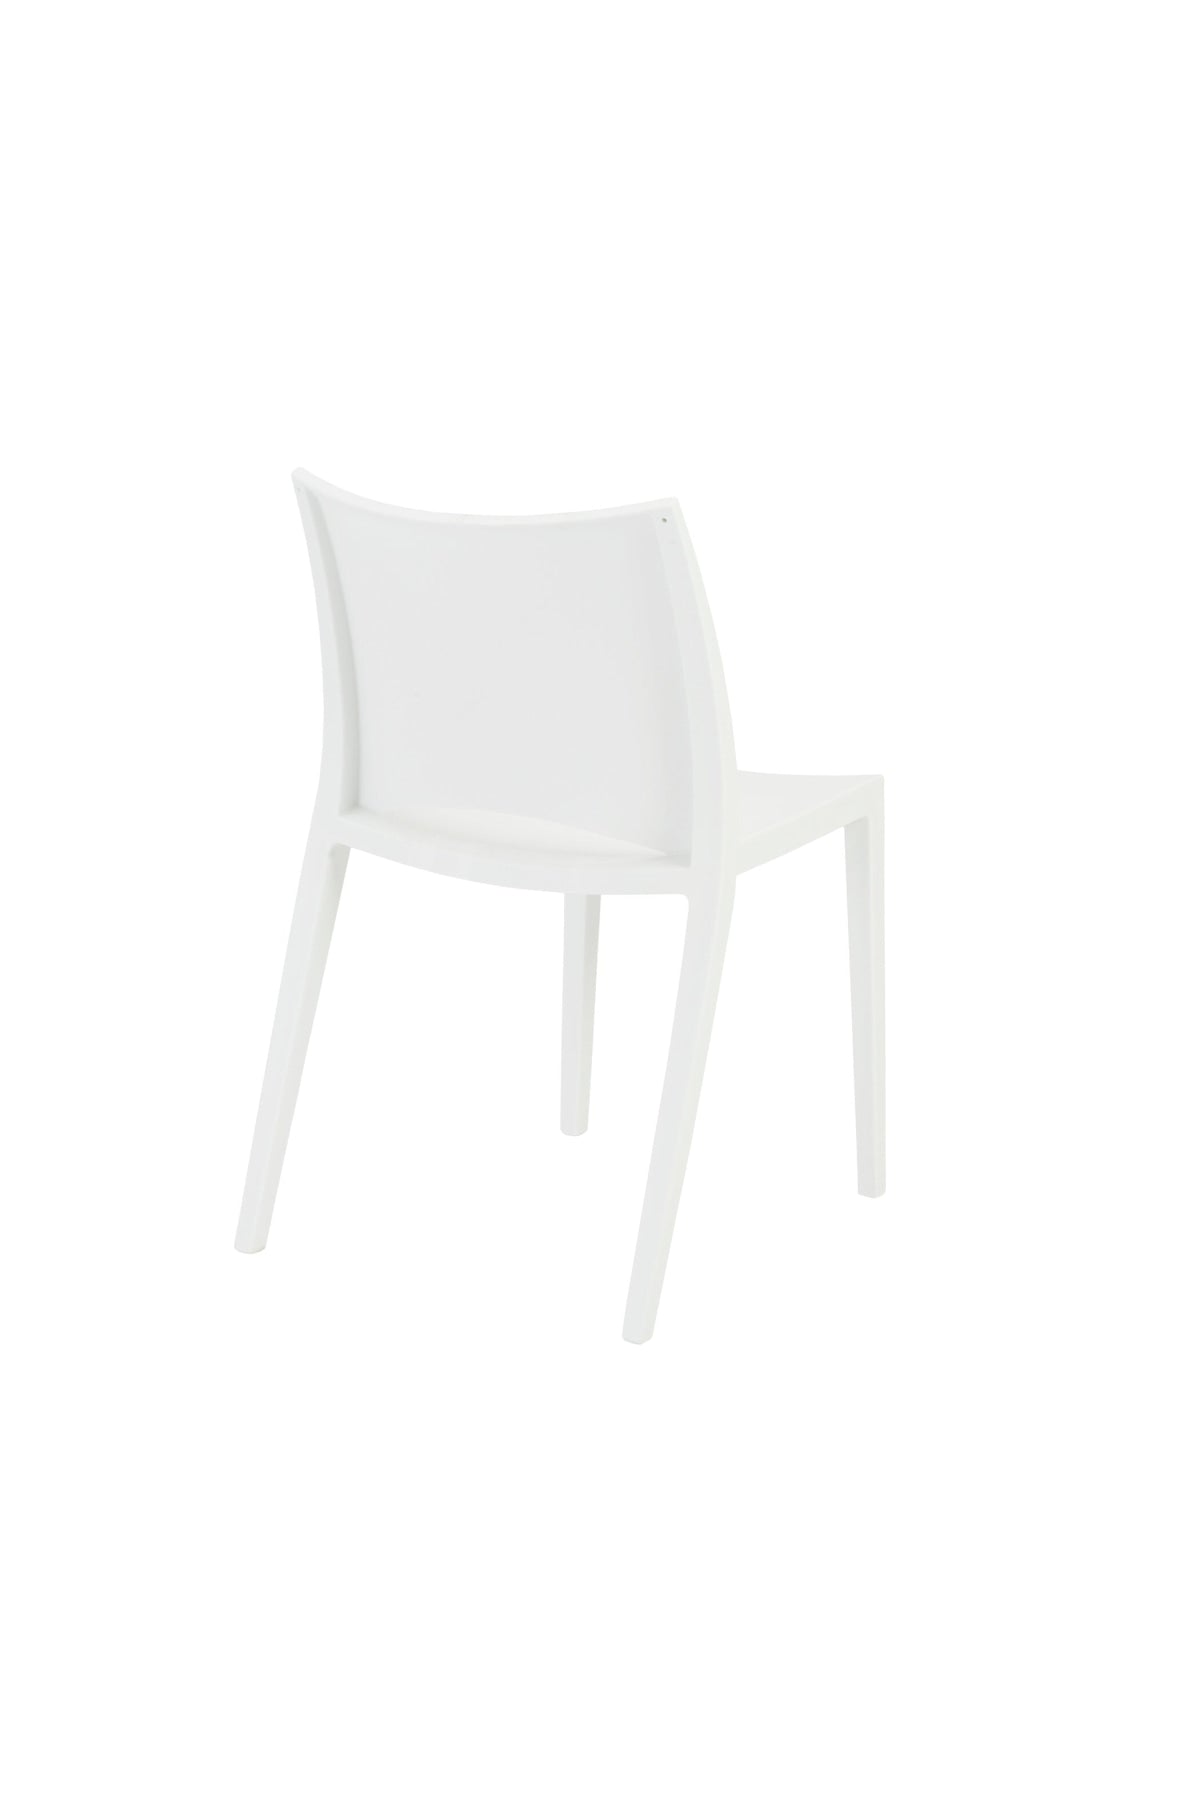 Boman Stacking Chair in White - Set of 2